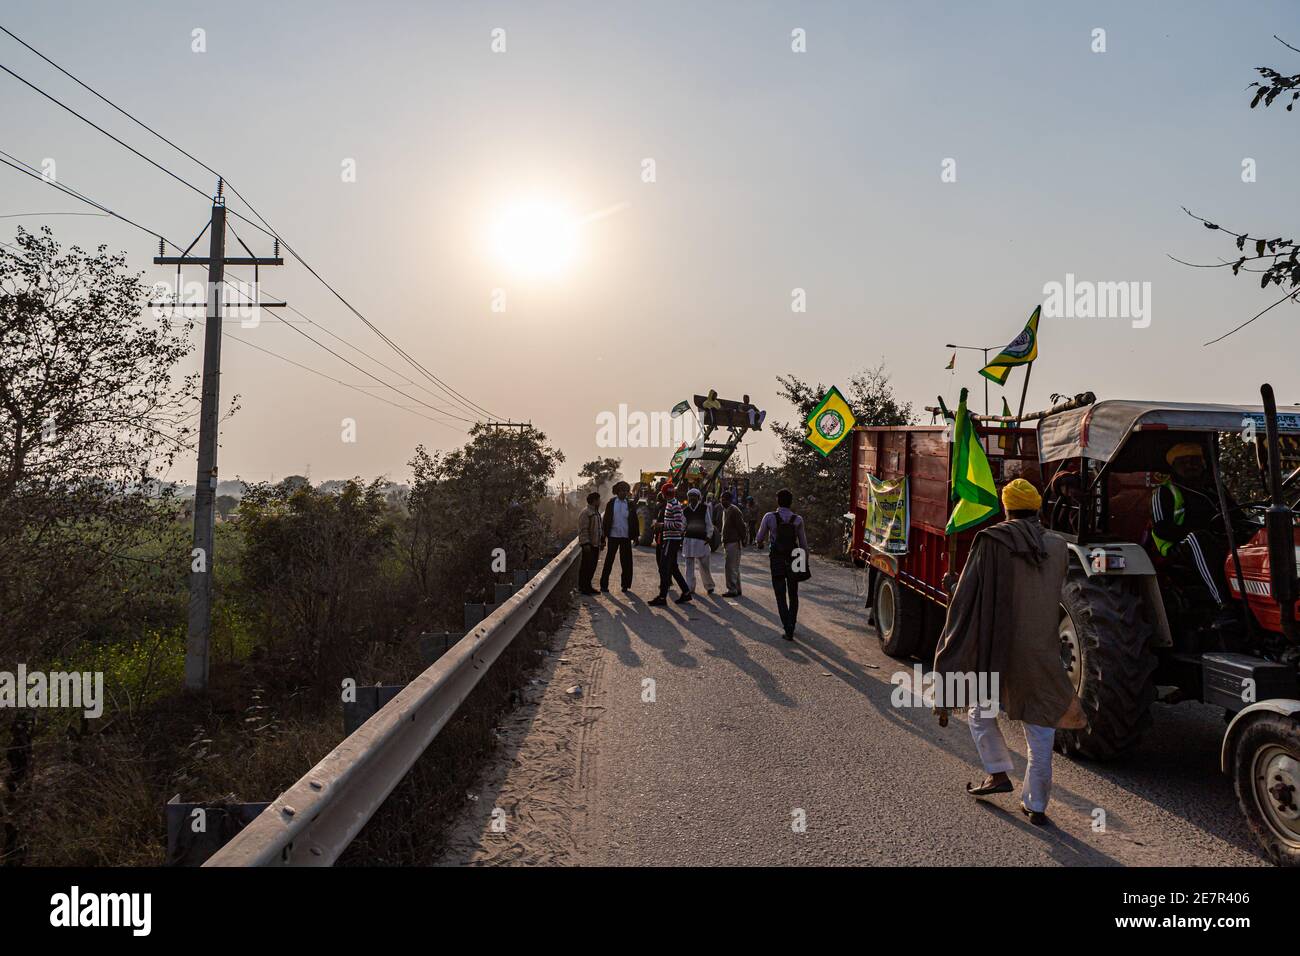 huge number of tractor with indian flag going for tractor rally during farmers protest at tikri border,delhi, india. Stock Photo